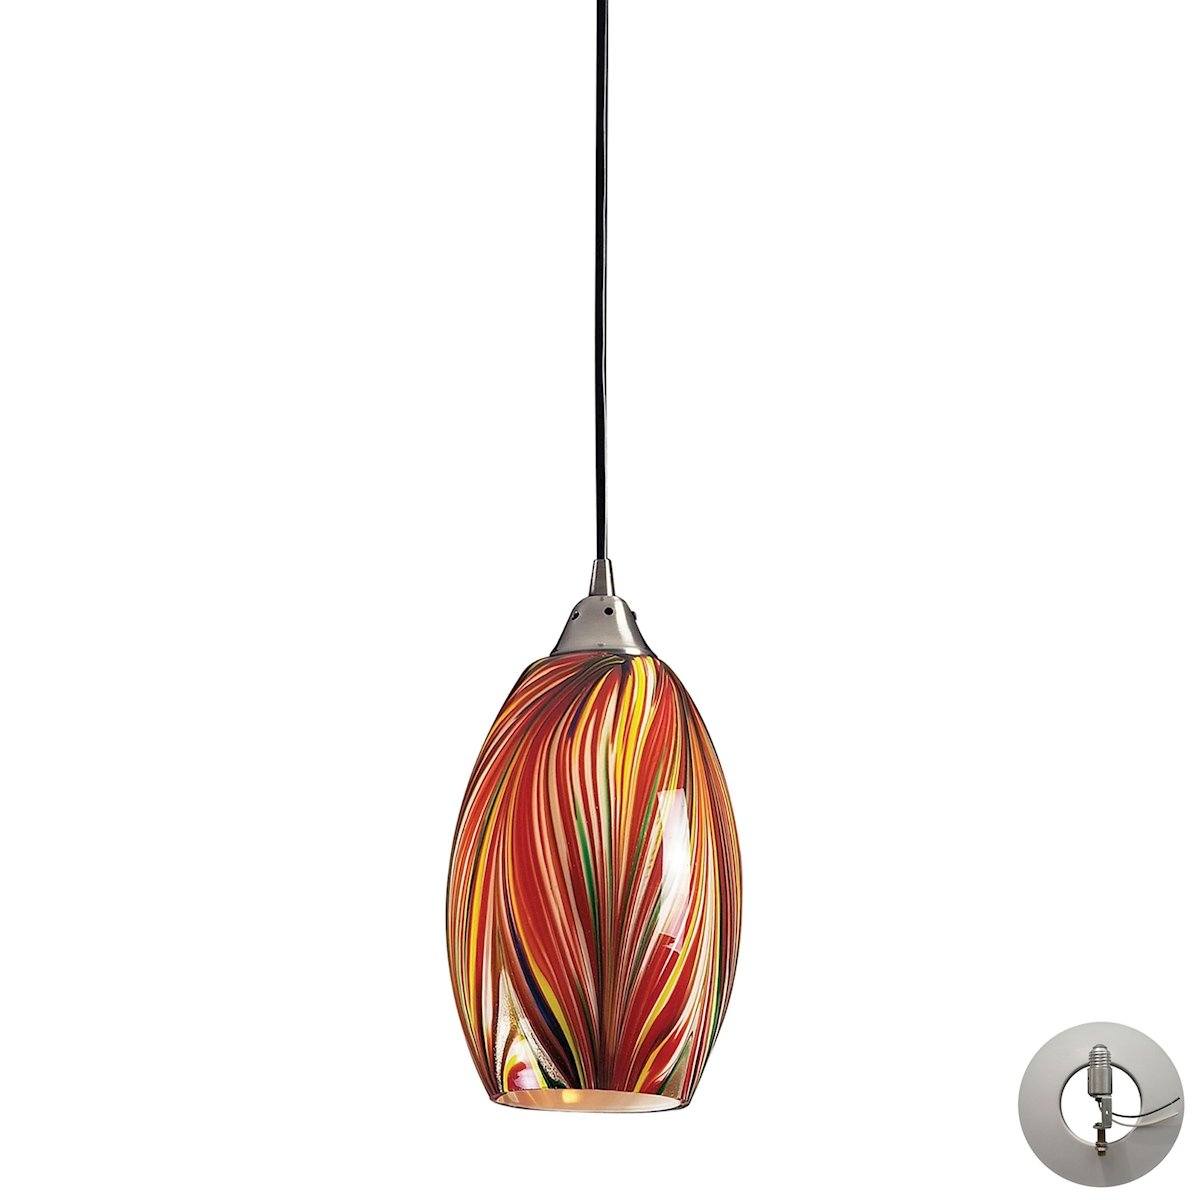 Mulinello Pendant In Satin Nickel And Multicolor Glass - Includes Recessed Lighting Kit Ceiling Elk Lighting 